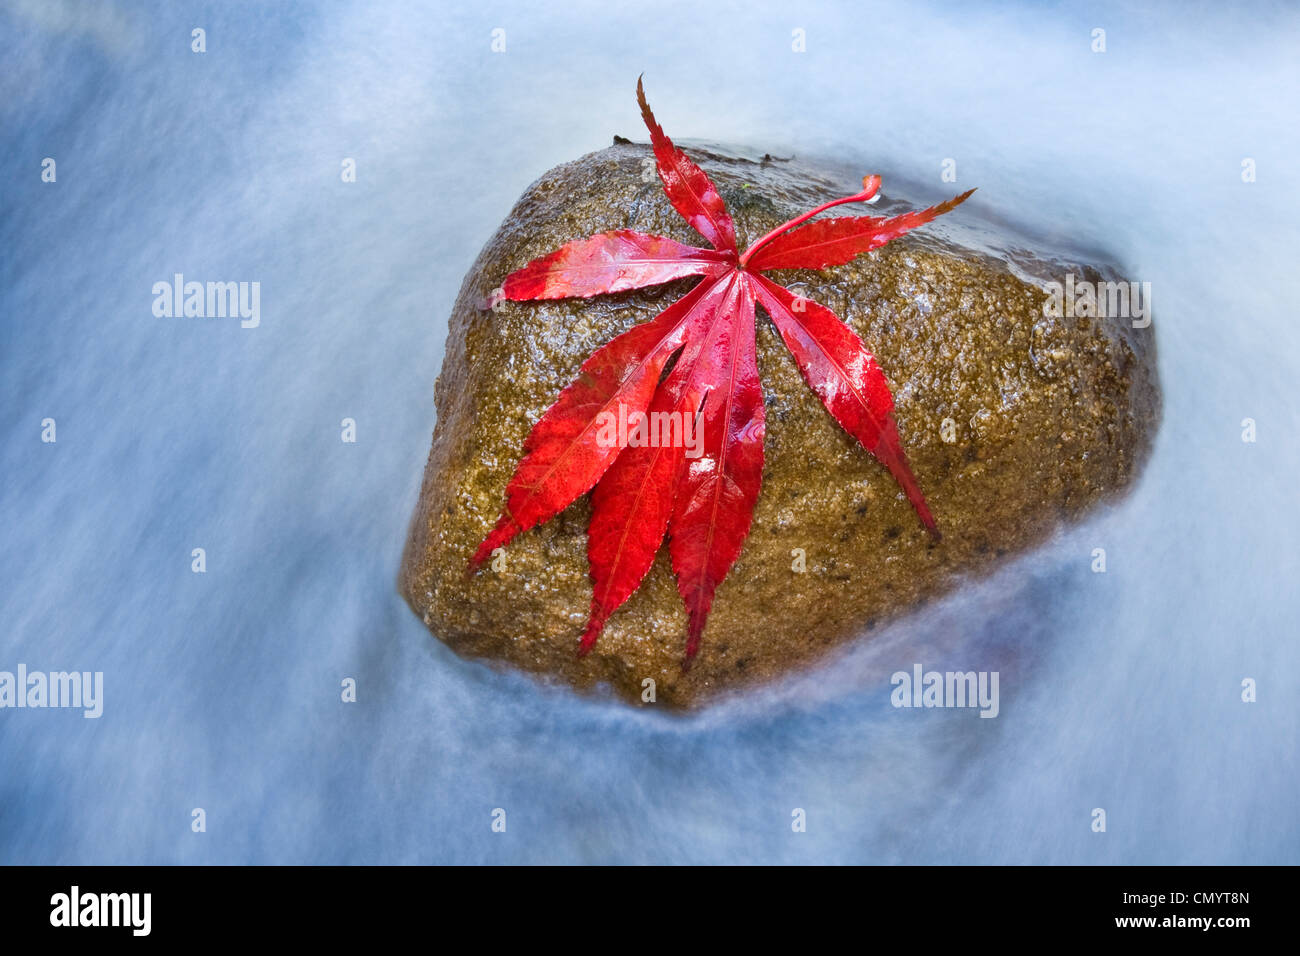 Japanese Maple leaf on stone in river. Stock Photo